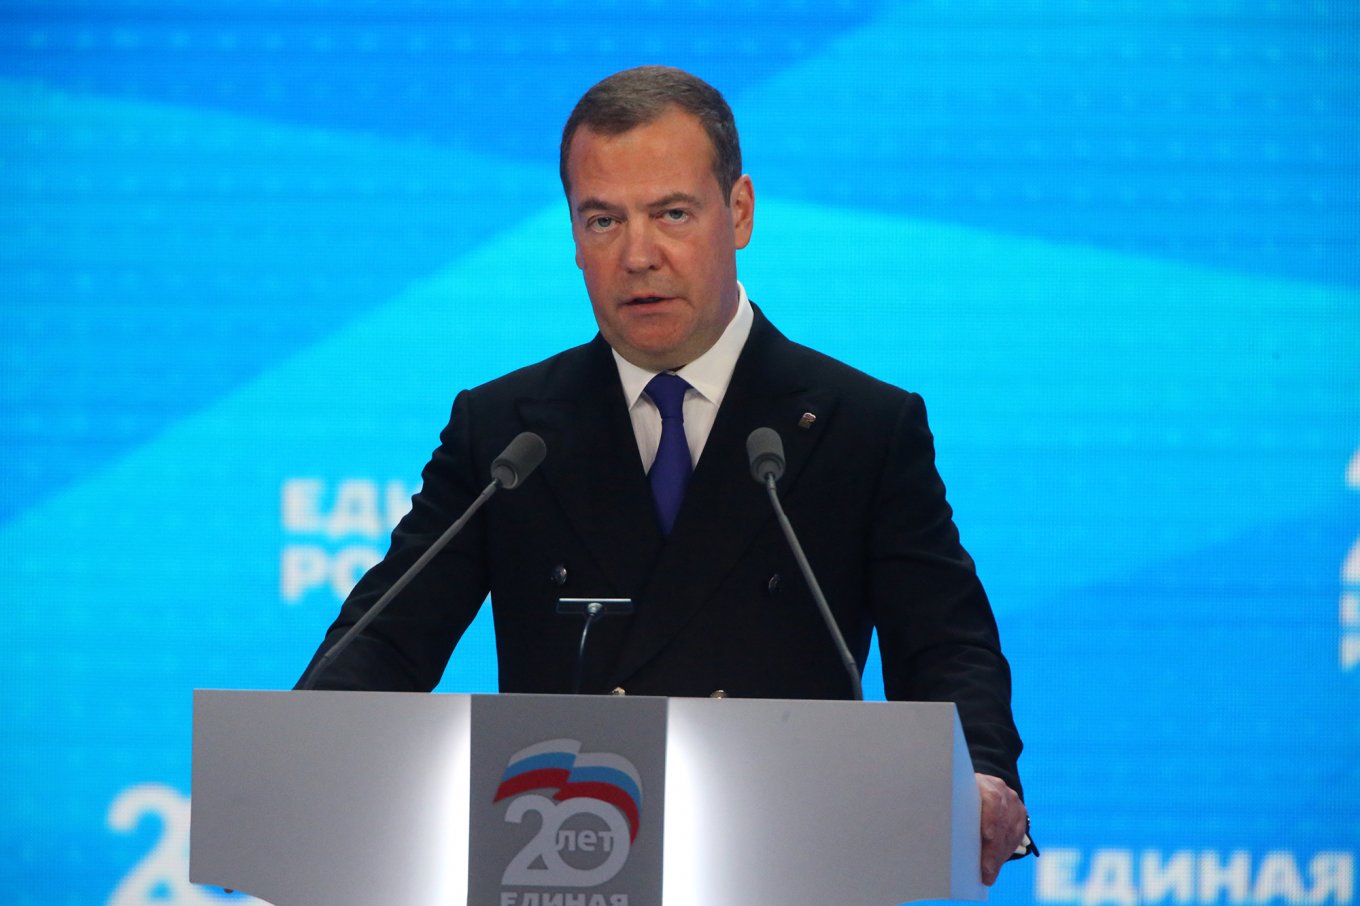 mitry Medvedev, deputy chair of Russia's Security Council, speaks in Moscow, Russia in 2021. (Mikhail Svetlov/Getty Images)